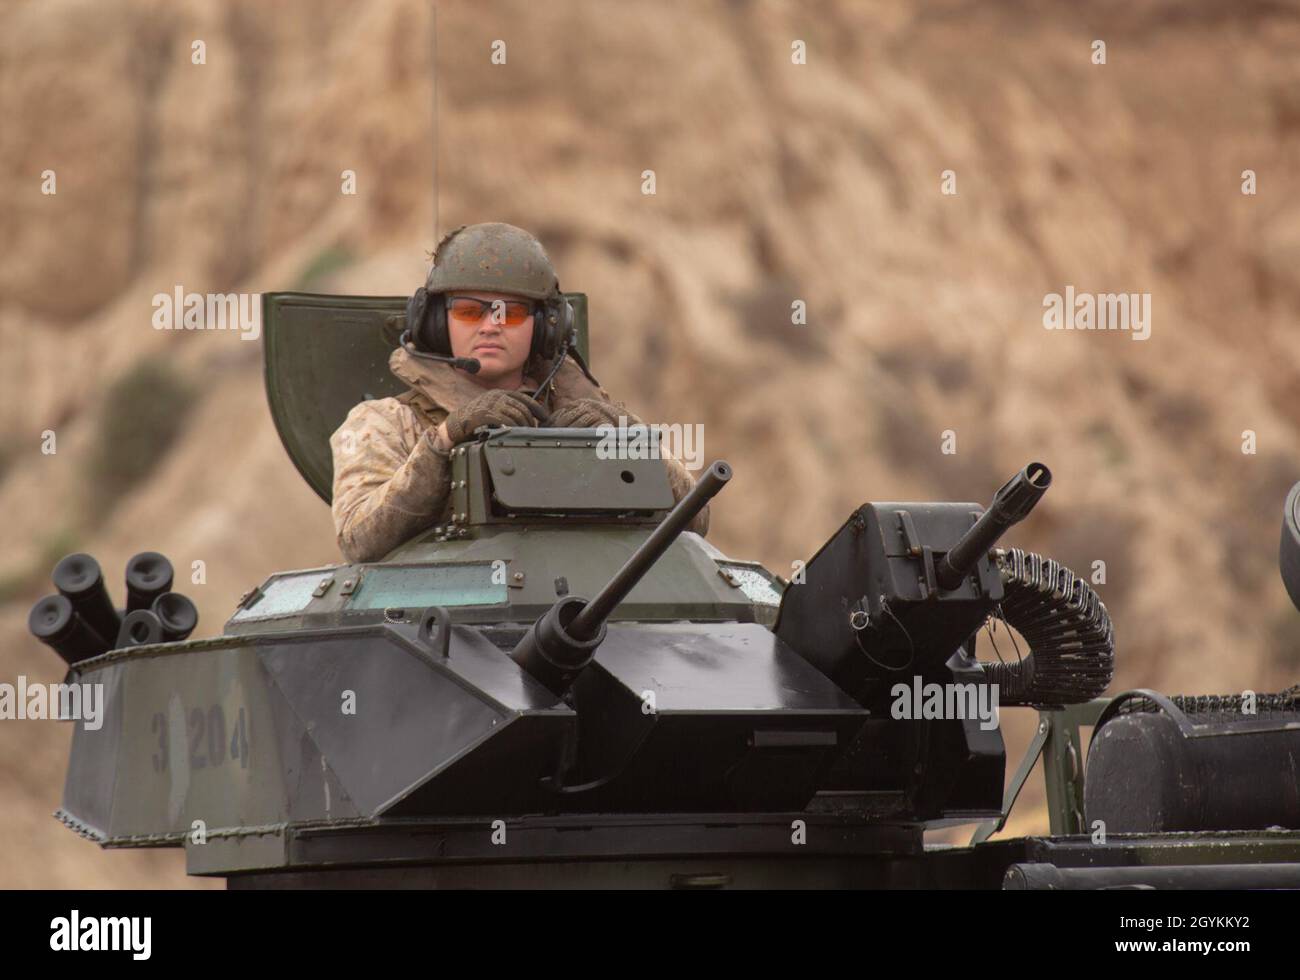 U.S. Marine Corps Cpl. Alexander Pritchard, a crew chief with 3rd Assault Amphibian Battalion, operates the turret of an AAV-P7/A1 assault amphibious vehicle as part of a section-level beach landing training during Exercise Iron Fist 2020 on Marine Corps Base Camp Pendleton, California, Jan. 20. Exercises like Iron Fist enhance the Marine Corps ability to quickly deploy sea-based assets and provide military forces anywhere in the world. (U.S. Marine Corps photo by Sgt. Desiree King) Stock Photo